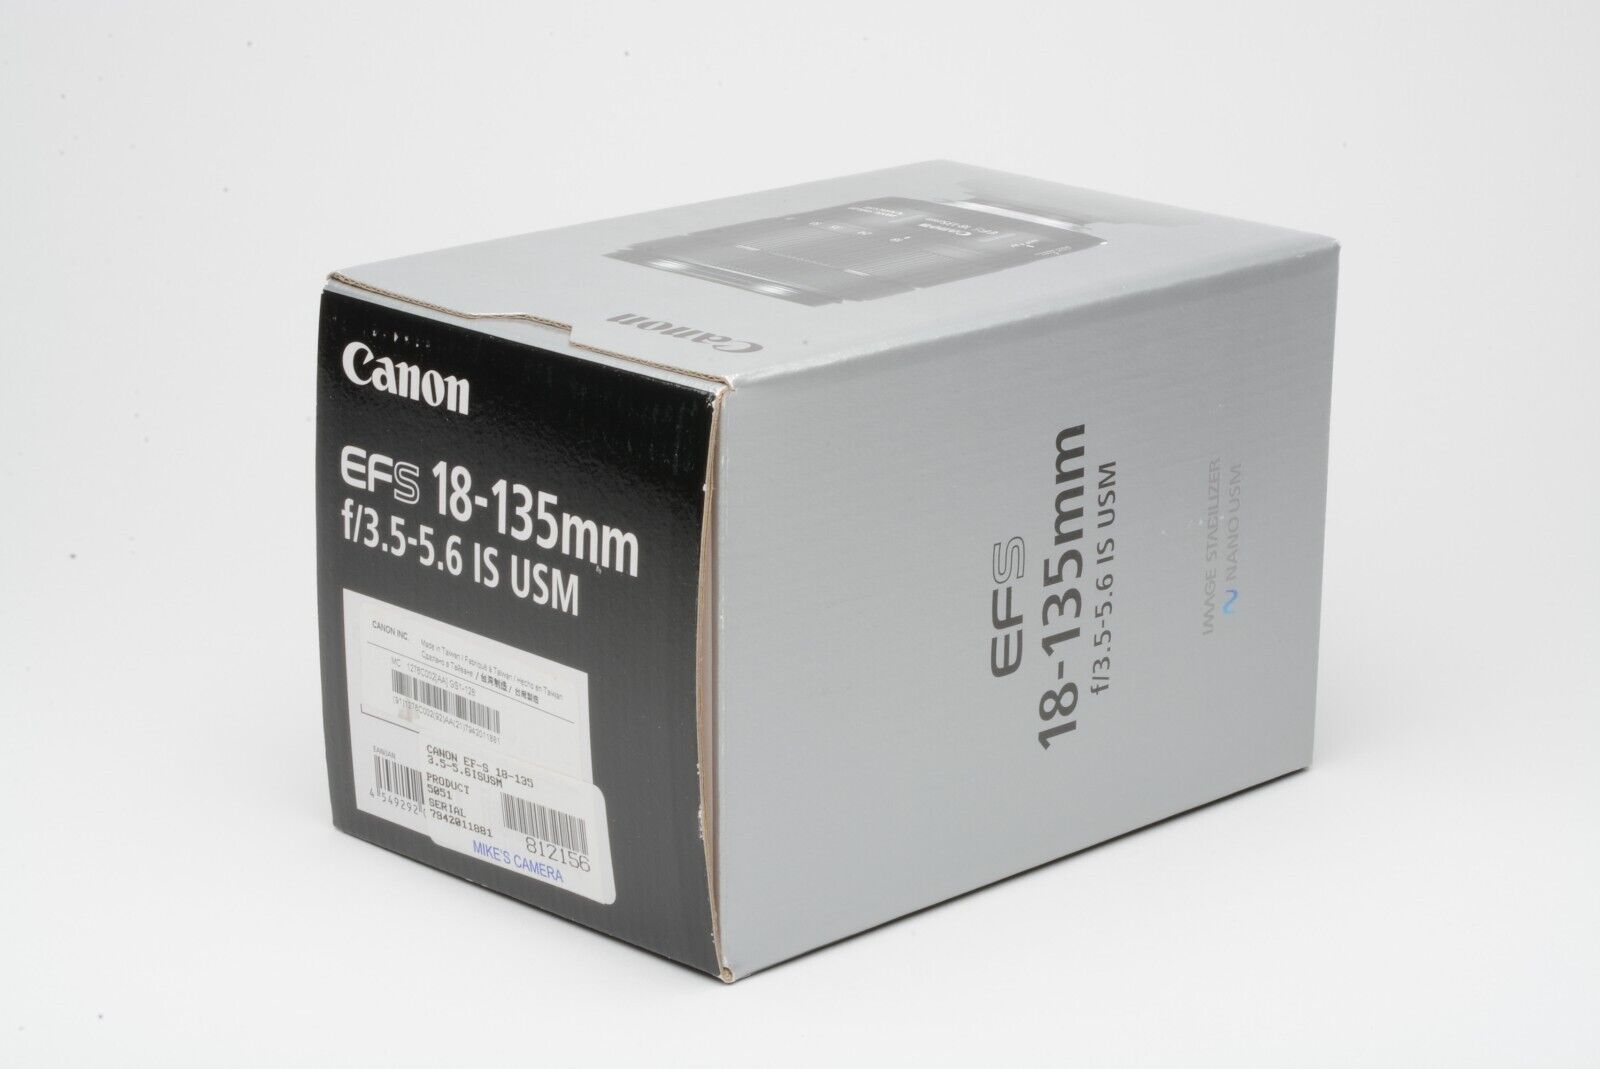 Canon EFS 18-135mm f3.5-5.6 IS USM zoom lens, barely used, boxed, USA  Version + UV